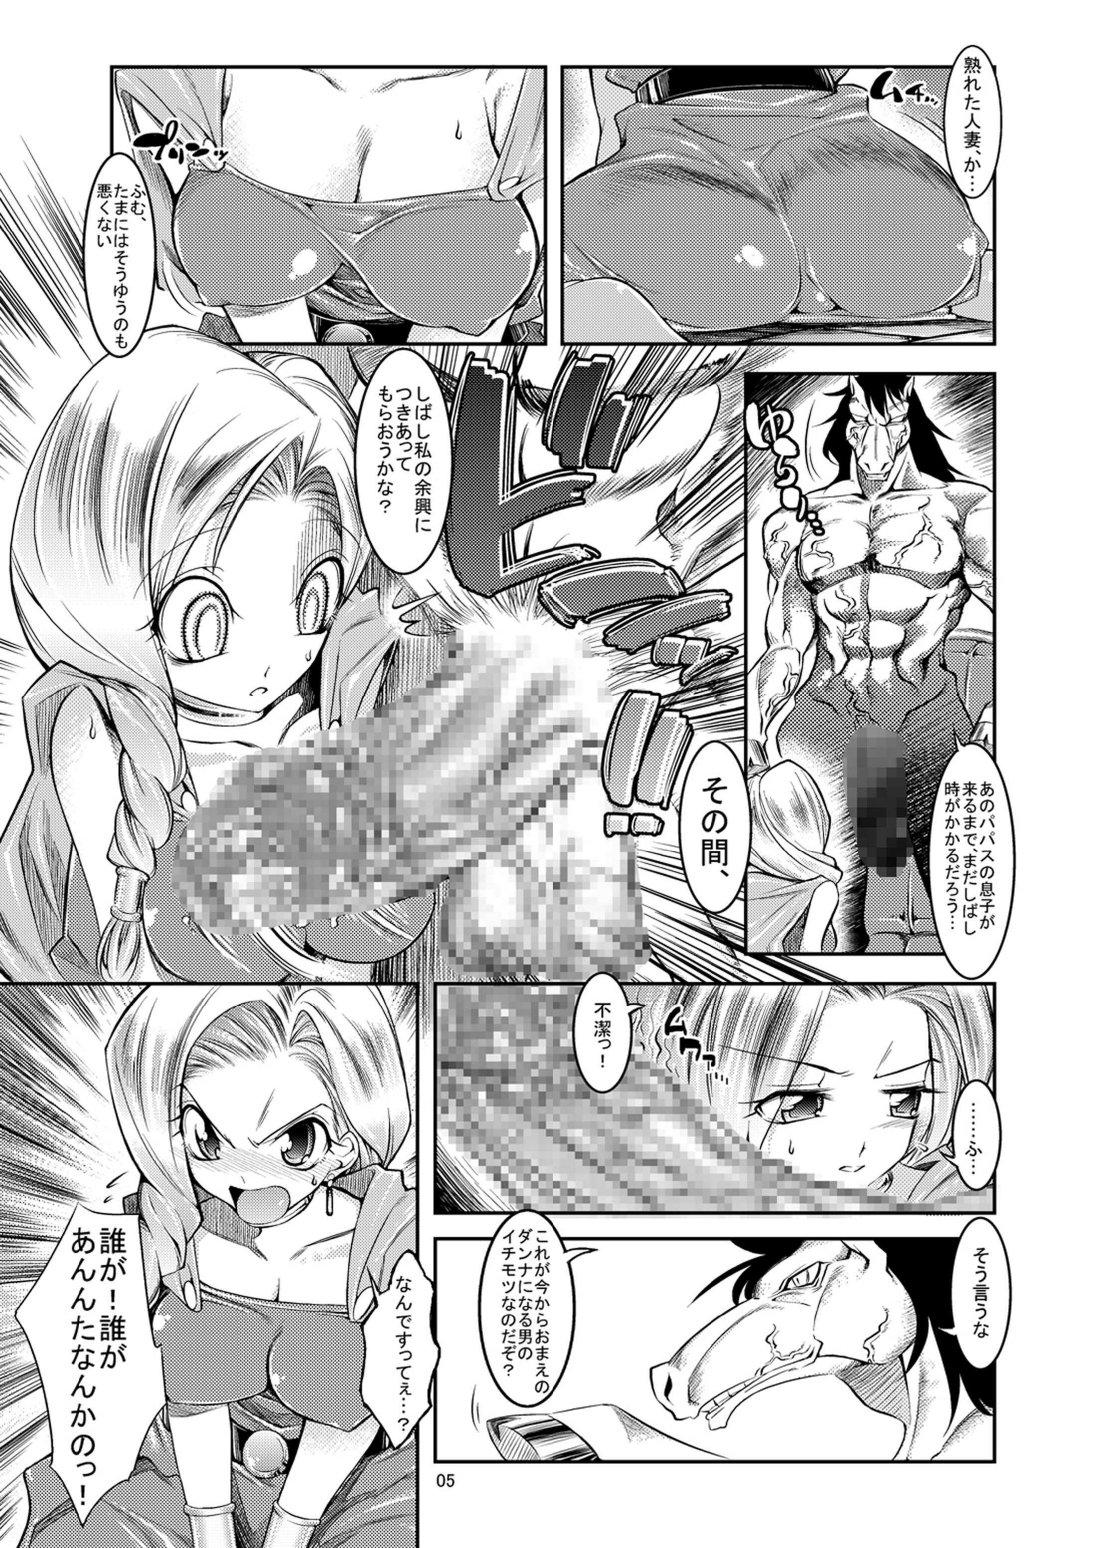 Girl Sucking Dick Medapani Quest Bianca-hen - Dragon quest v Bare - Page 5